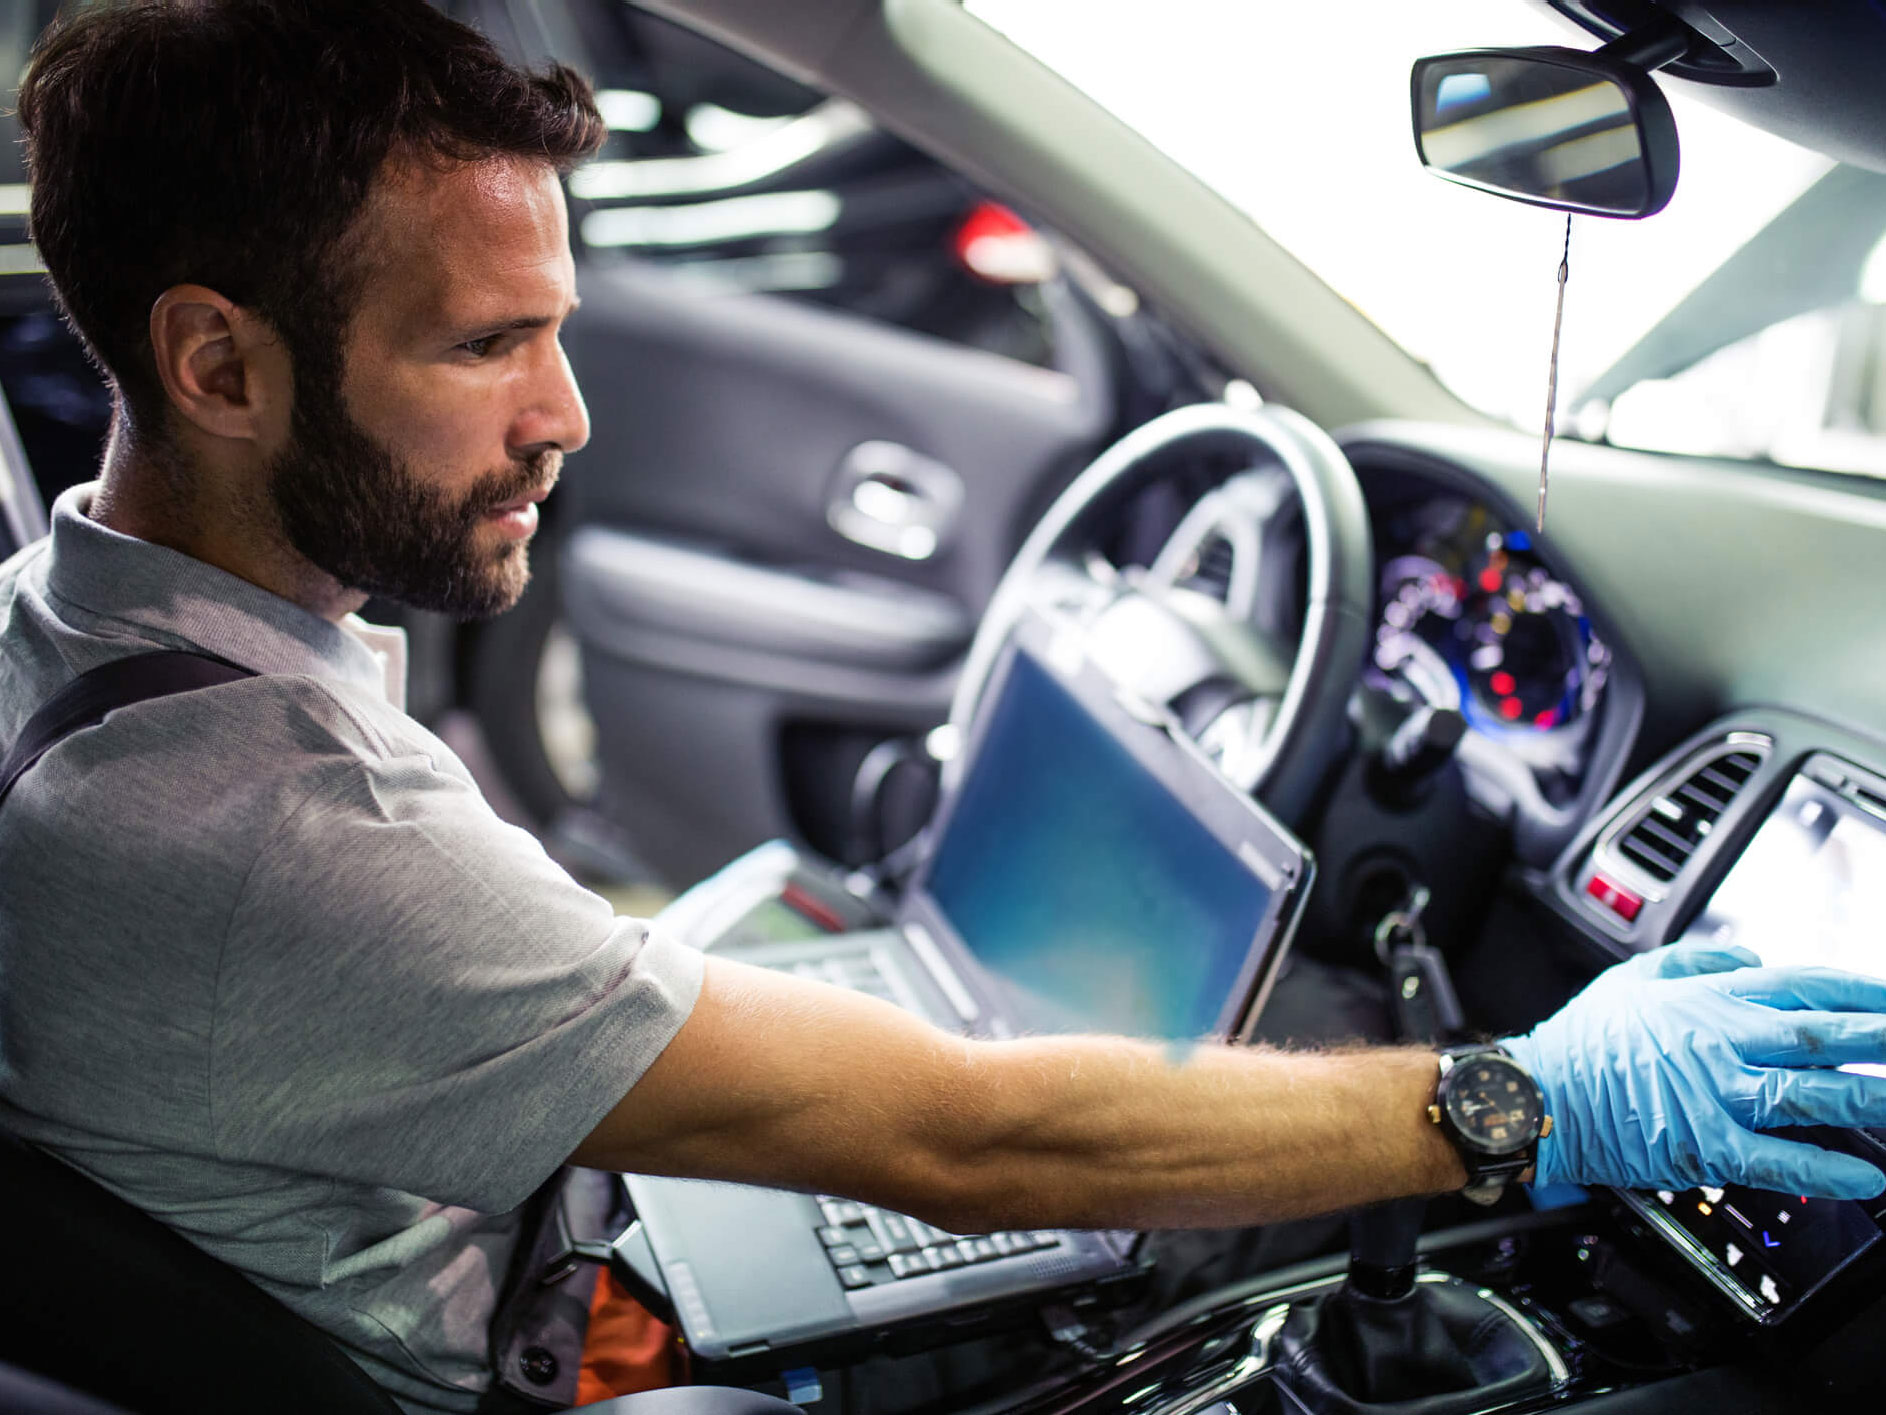 Bearded white male sitting in a car with an open laptop, testing the device mounted next to the steering wheel.